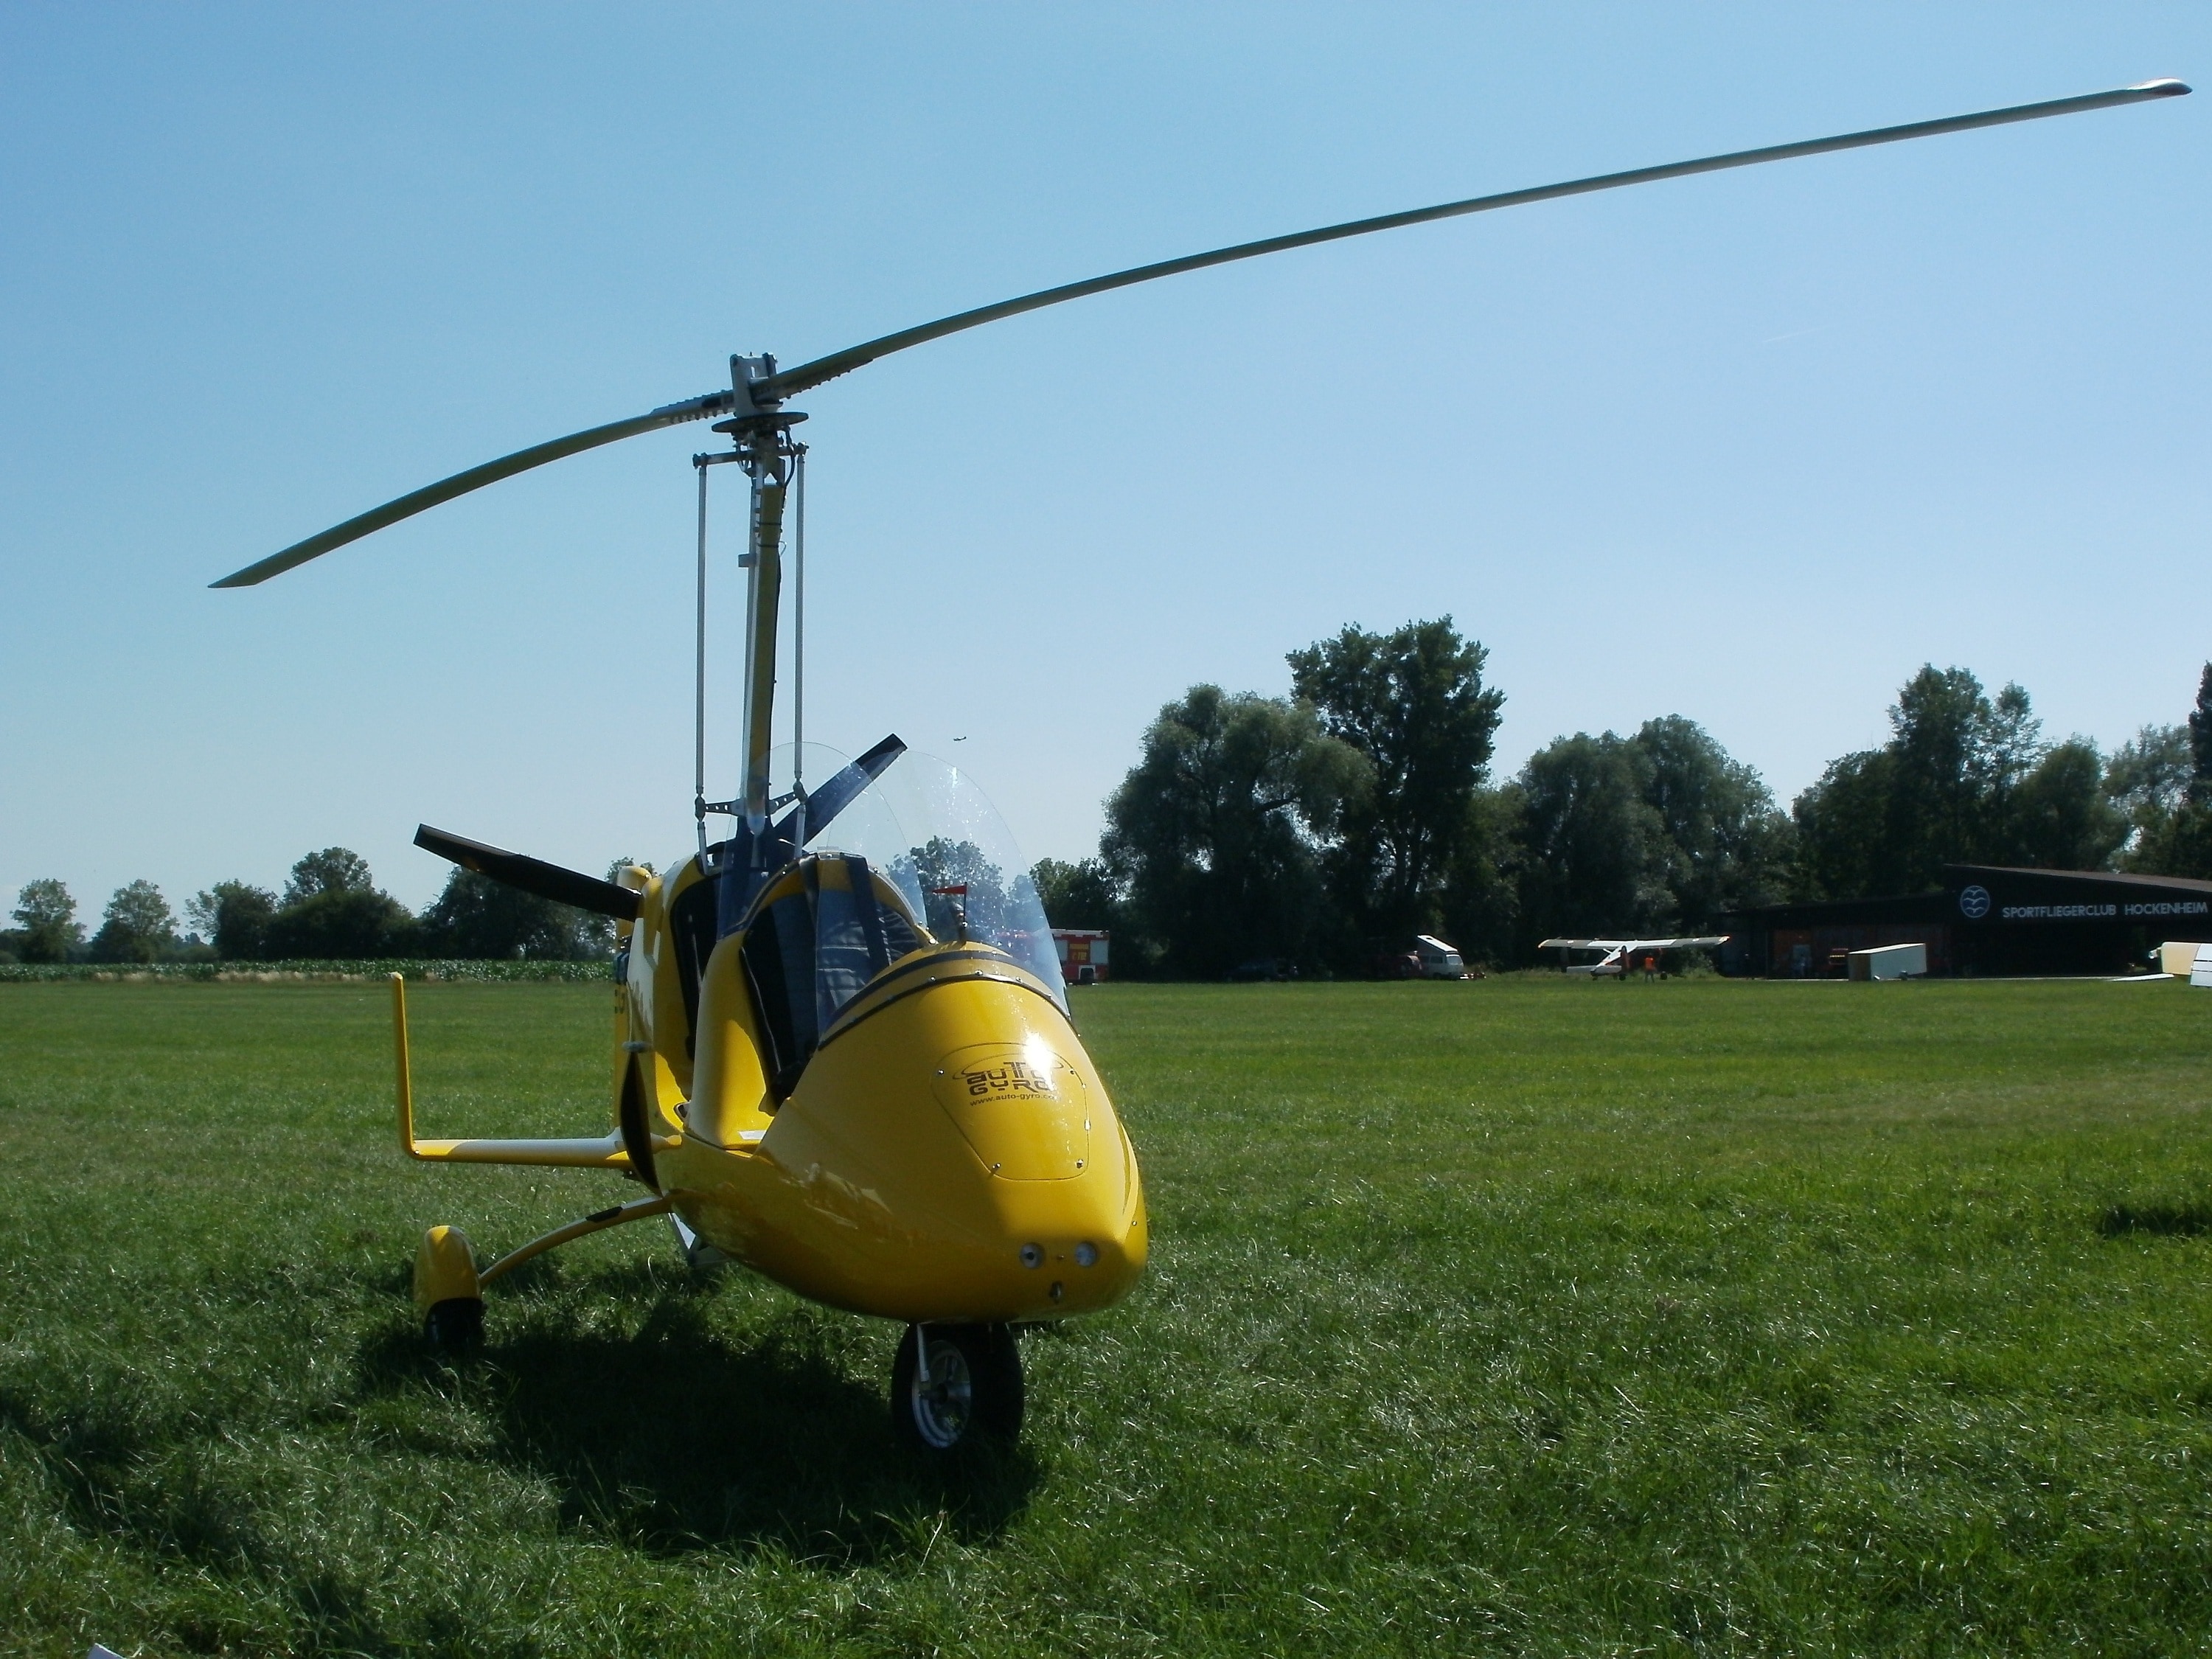 Aviation, Gyrocopter, Helicopter, field, agriculture